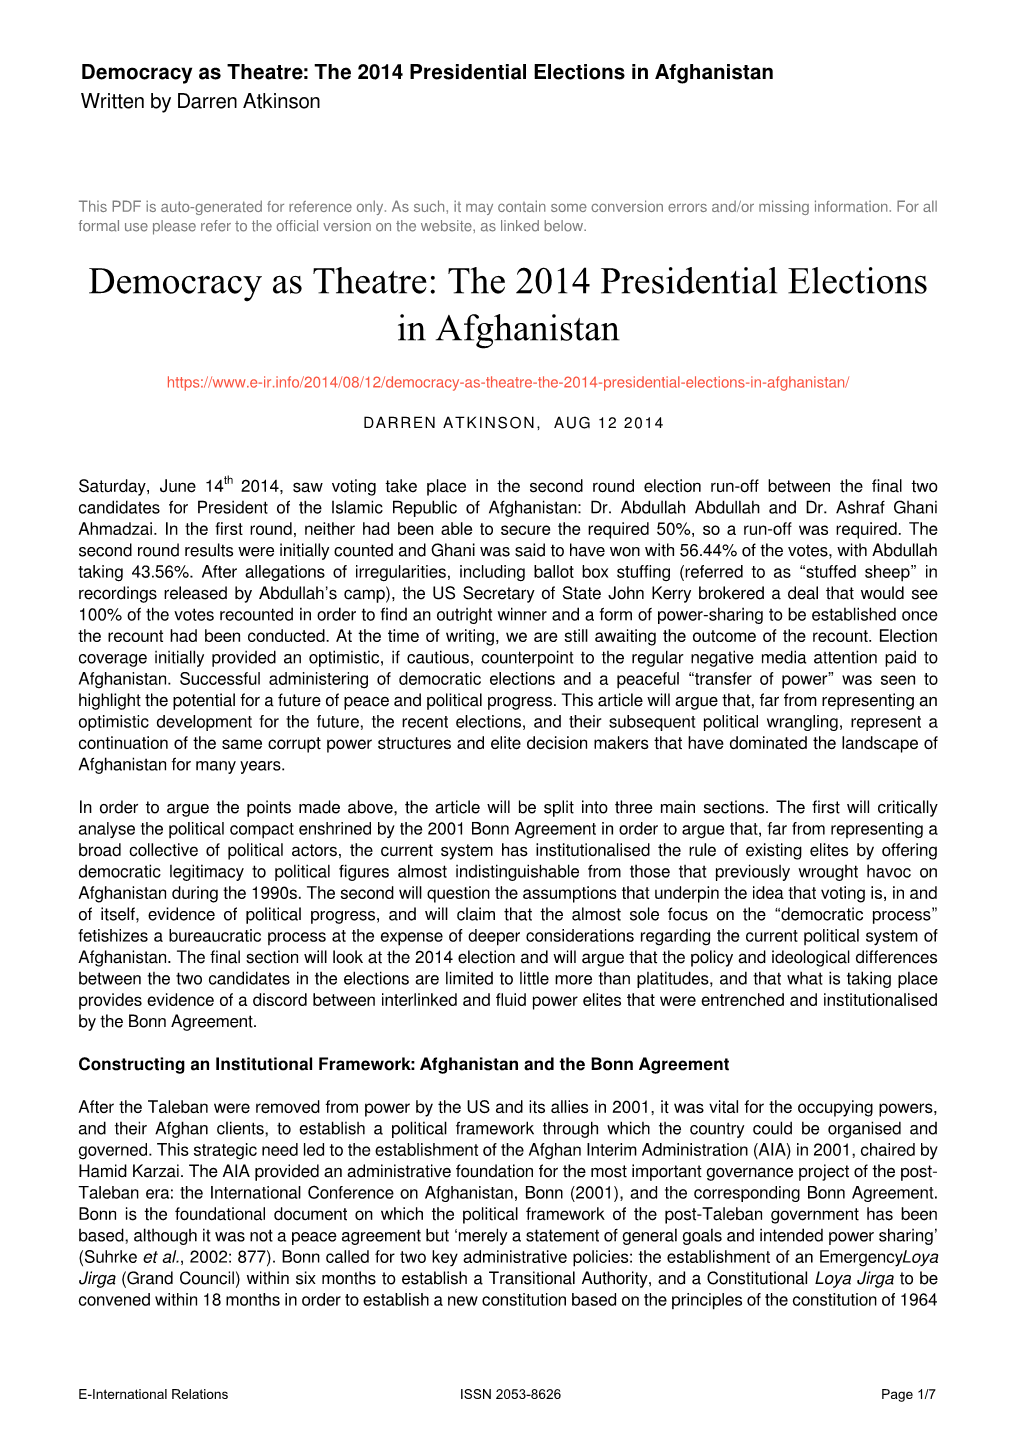 The 2014 Presidential Elections in Afghanistan Written by Darren Atkinson